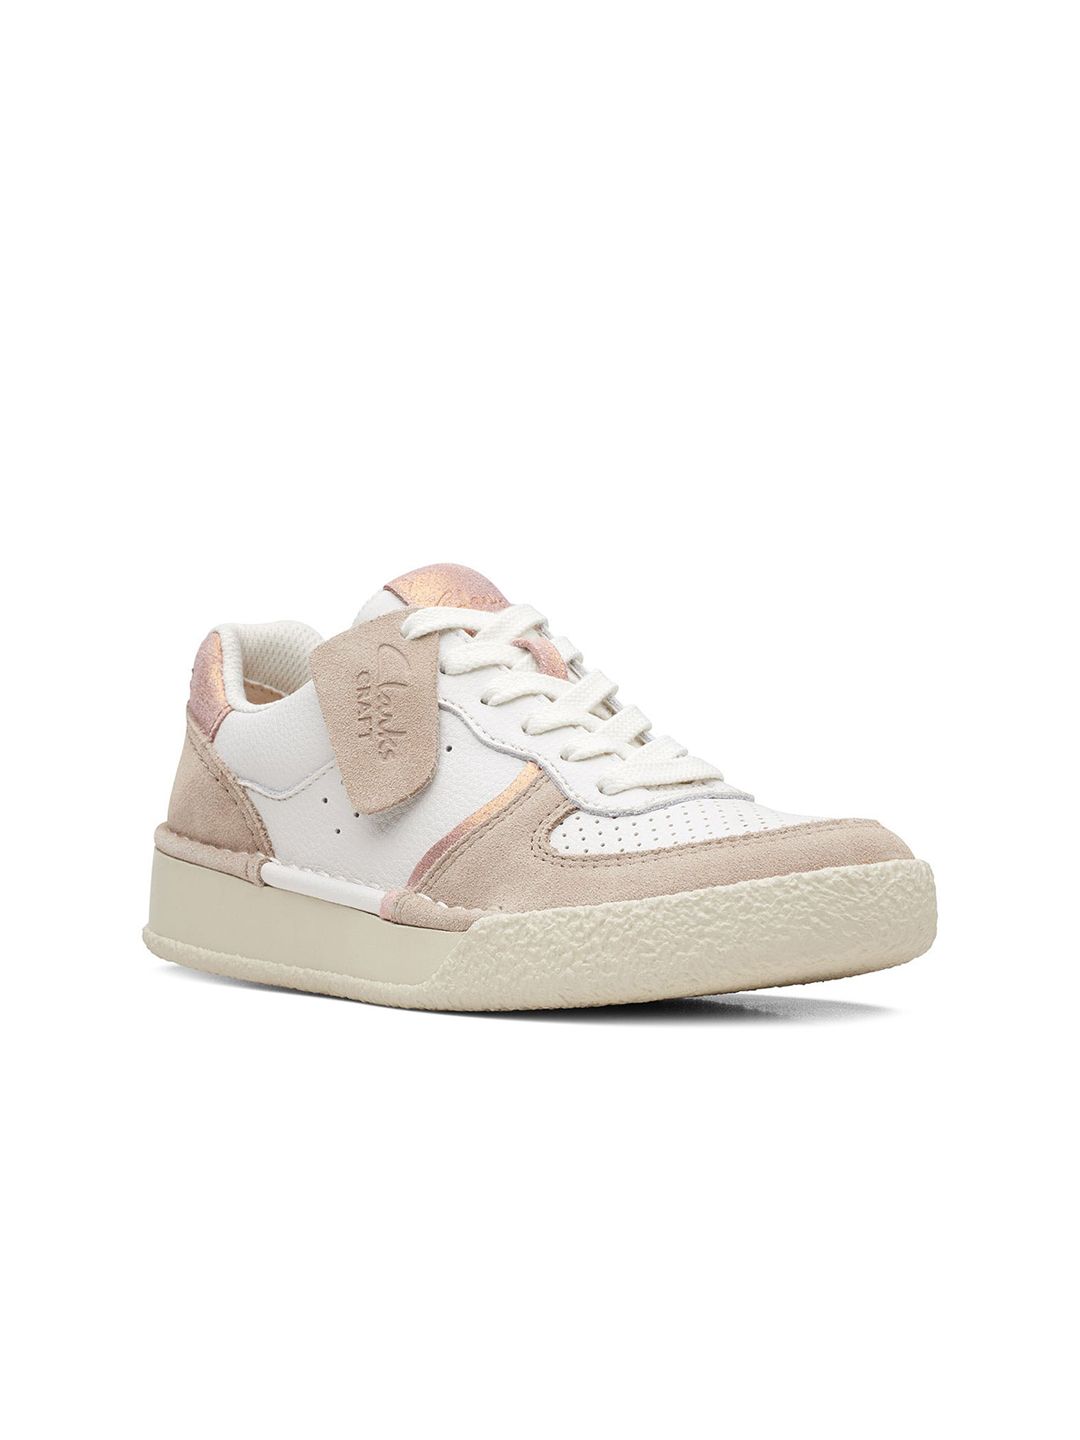 Clarks Women Colourblocked Suede Sneakers Price in India